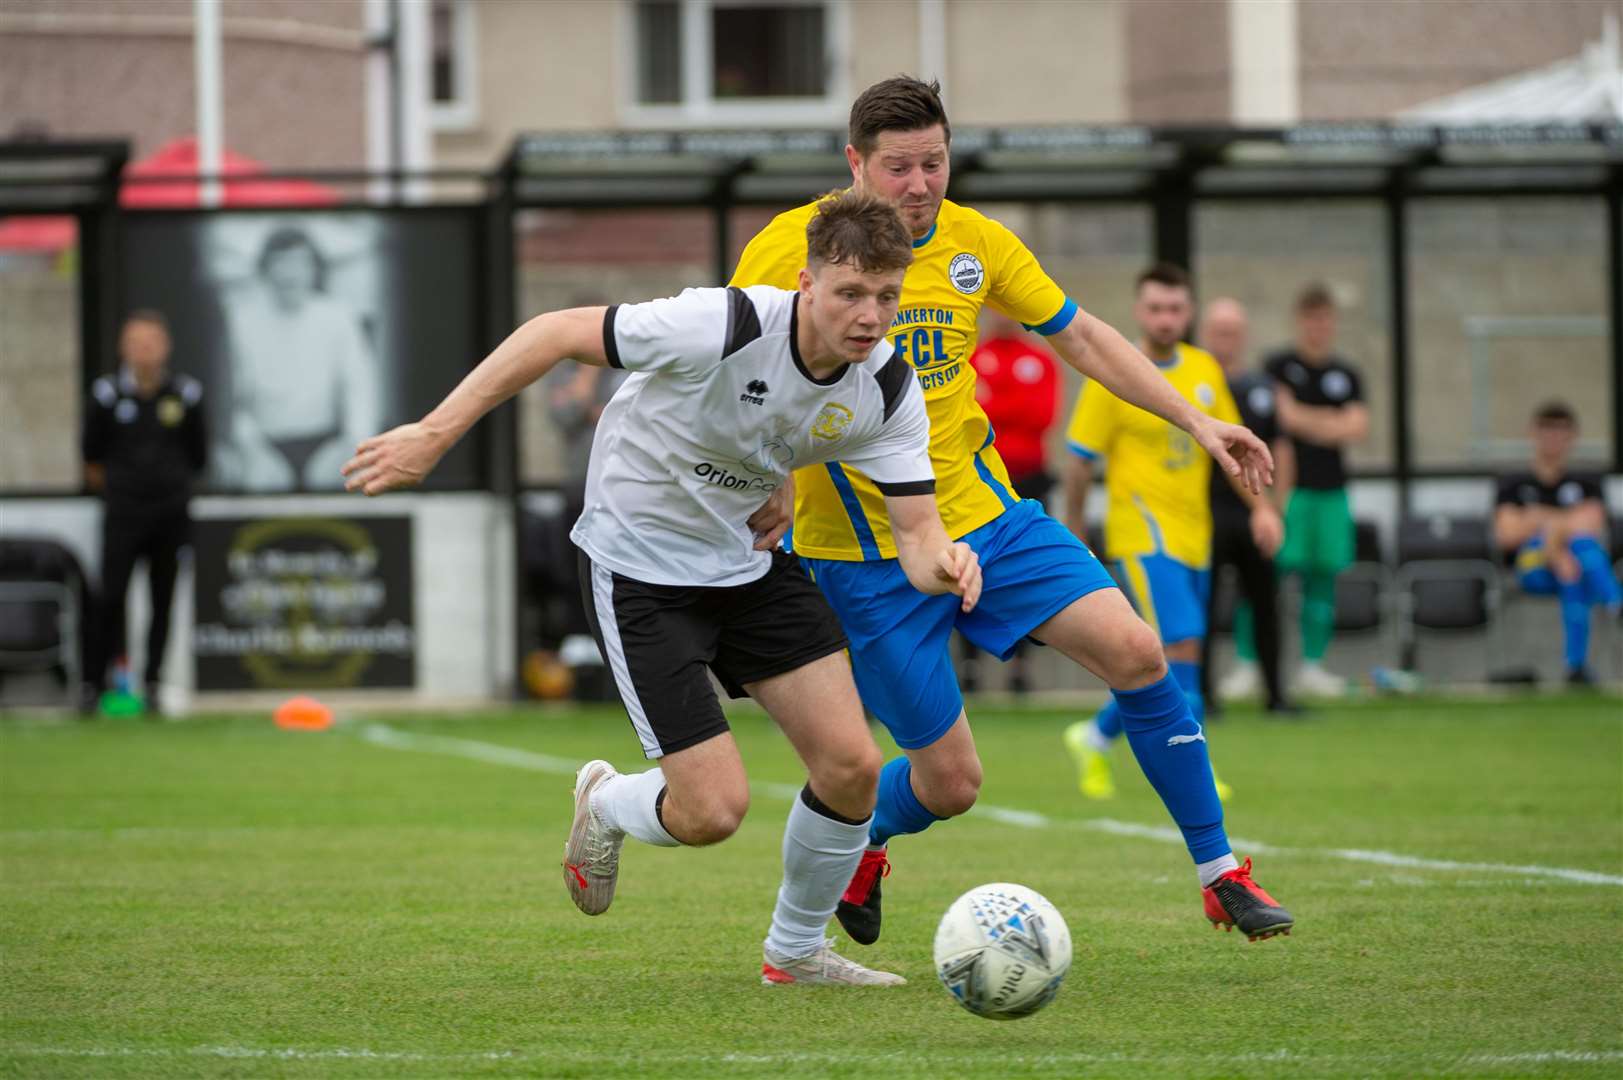 Harry Nicolson is no stranger to Clach, having spent time on loan at the club in the 2021/22 season. Picture: Callum Mackay